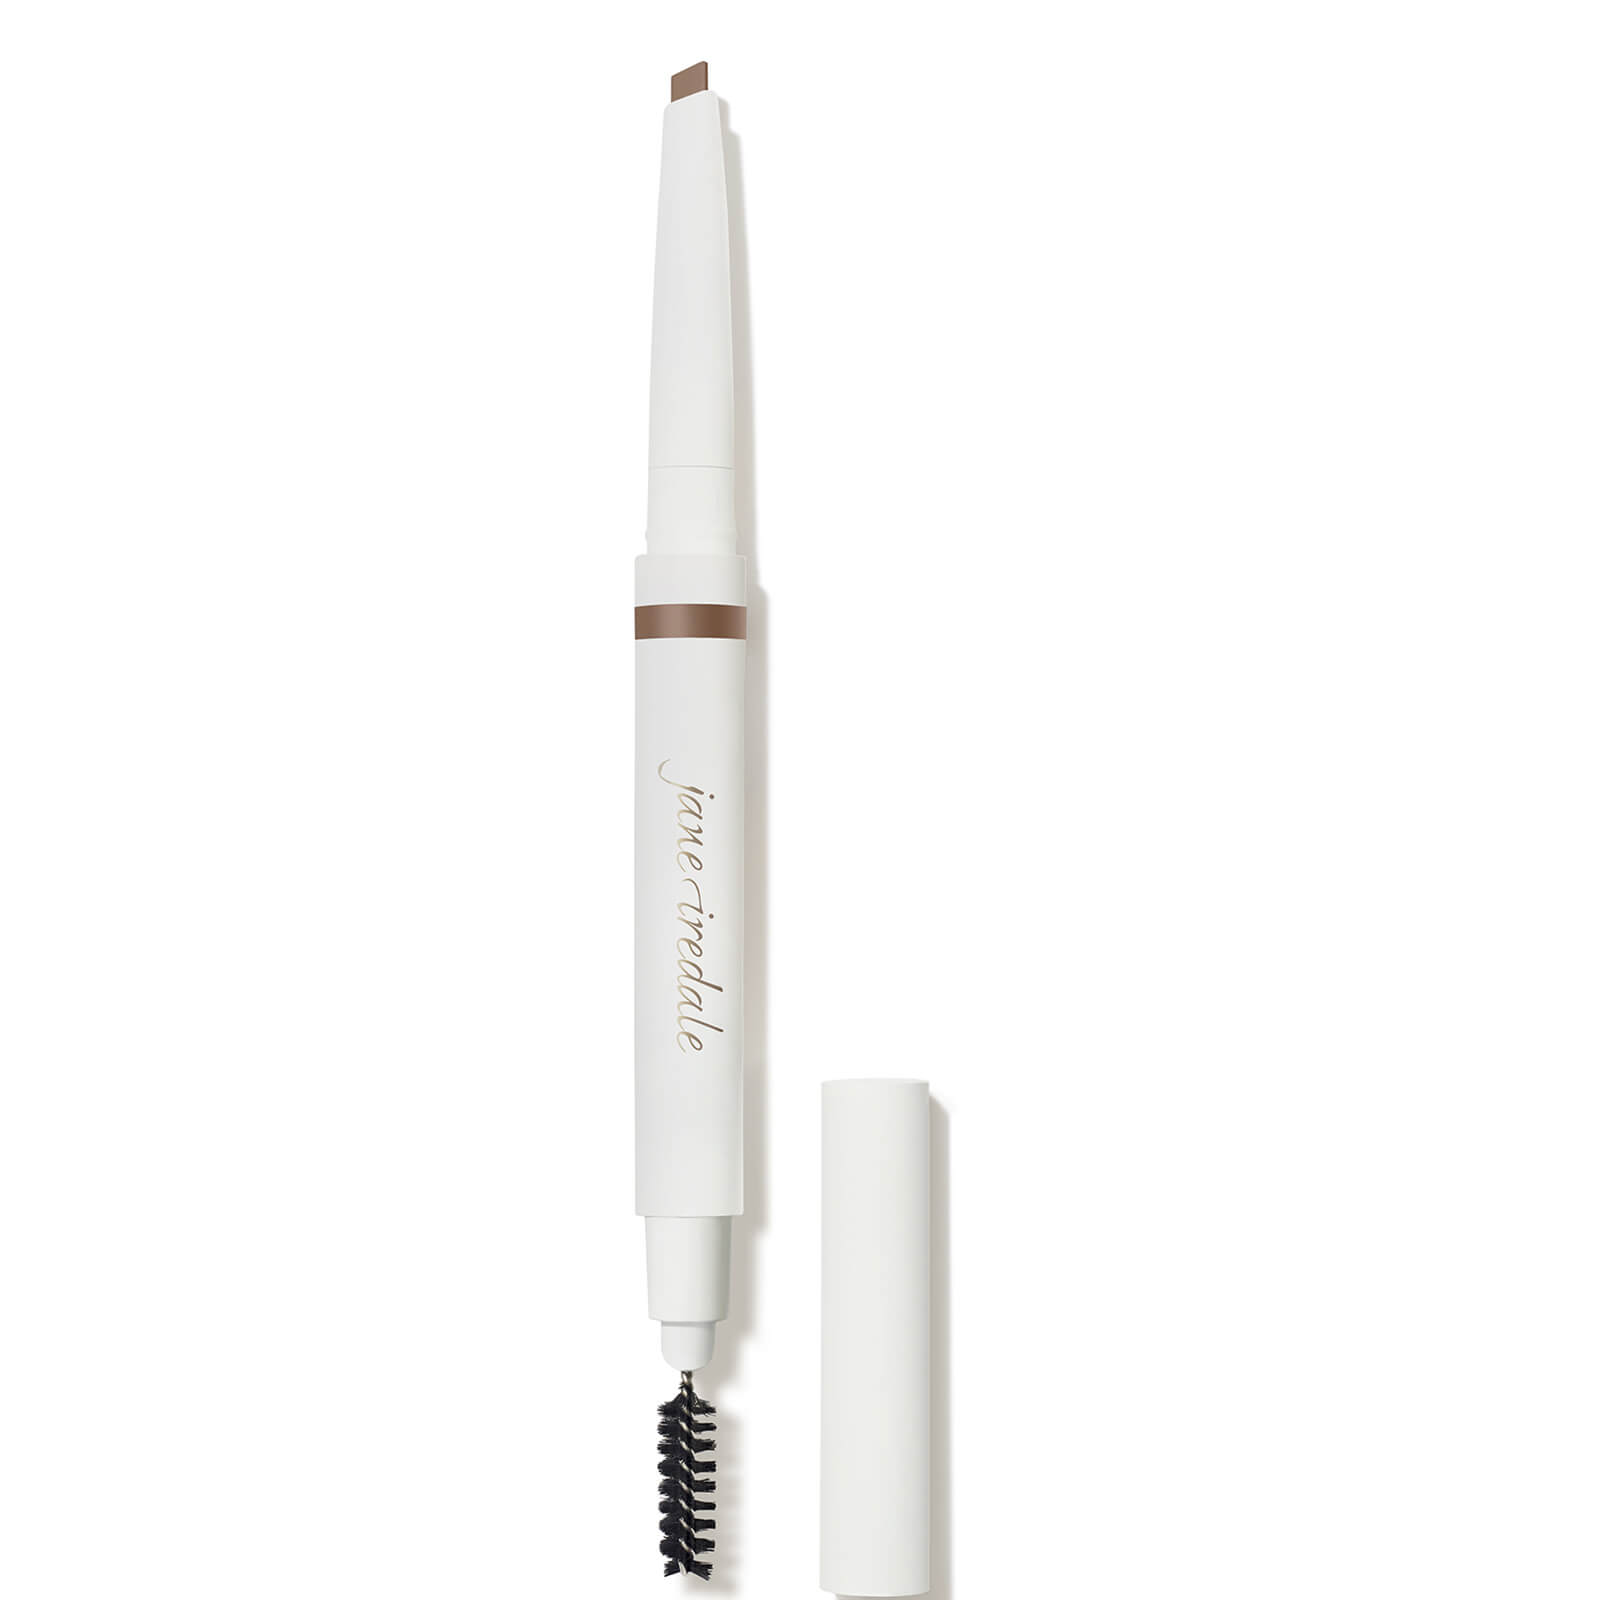 Jane Iredale Purebrow Shaping Pencil 0.23g (various Shades) In Ash Blonde